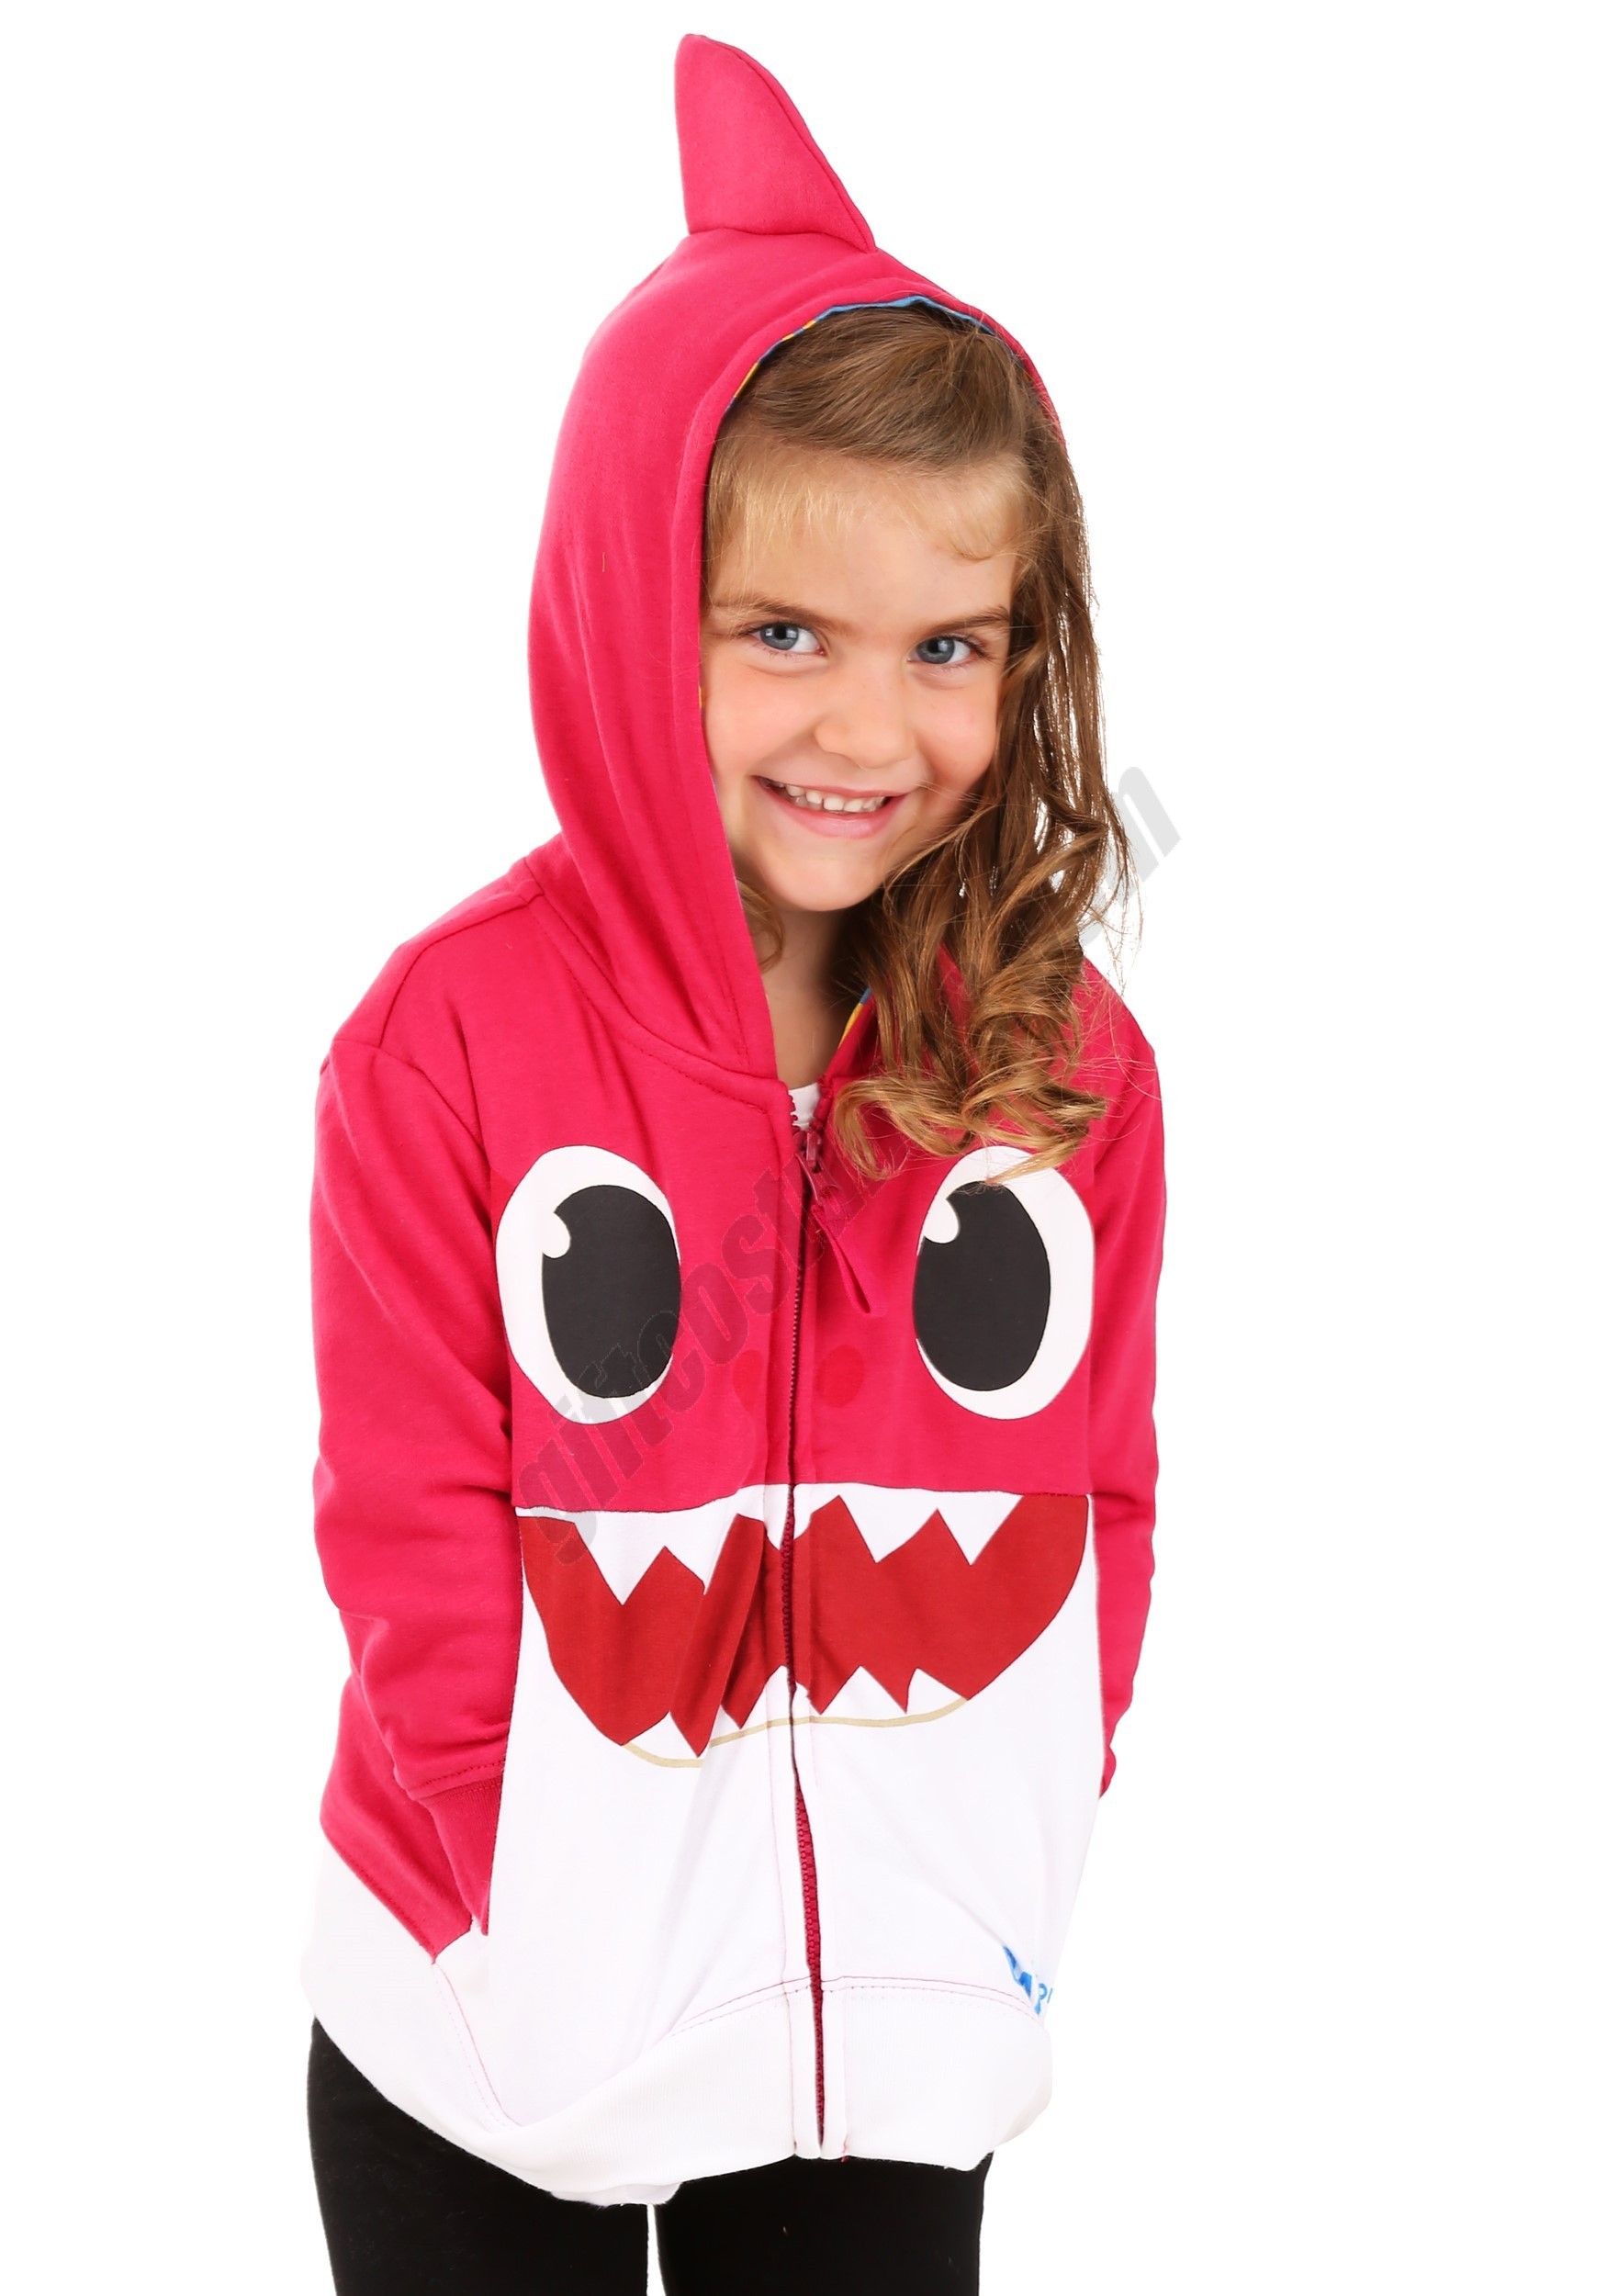 Baby Shark Costume Pink Hoodie for Toddlers Promotions - Baby Shark Costume Pink Hoodie for Toddlers Promotions